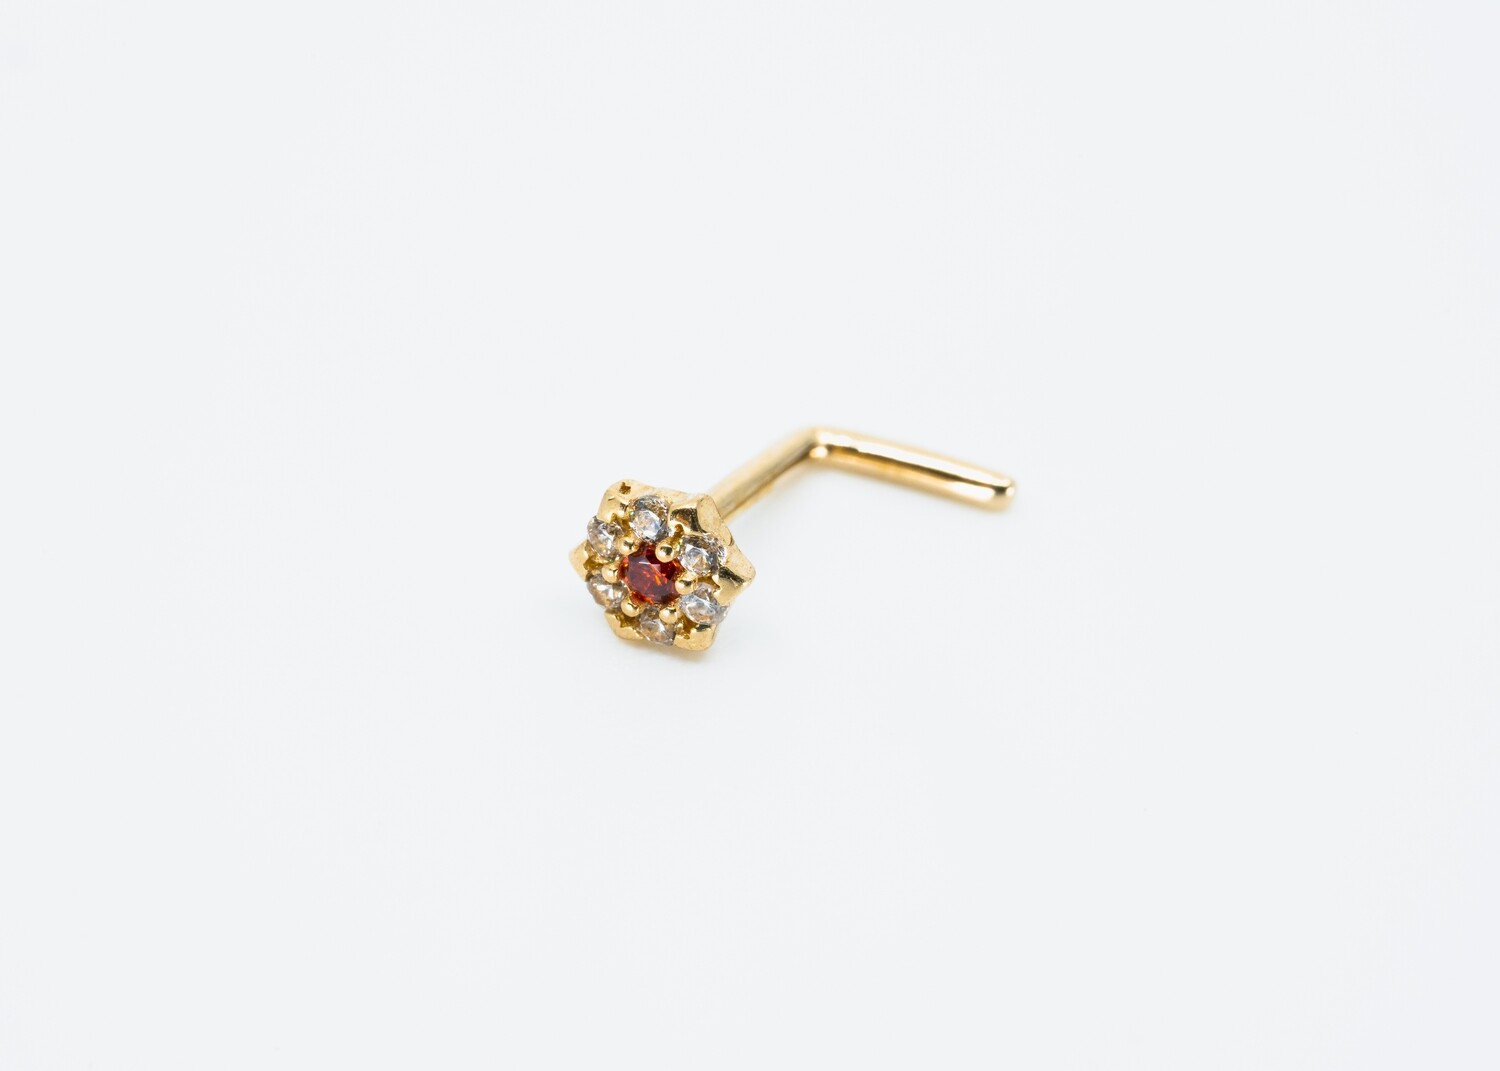 Solid 14kt gold nose piercing with CZ amber gemstone and 6 cystals gemstones